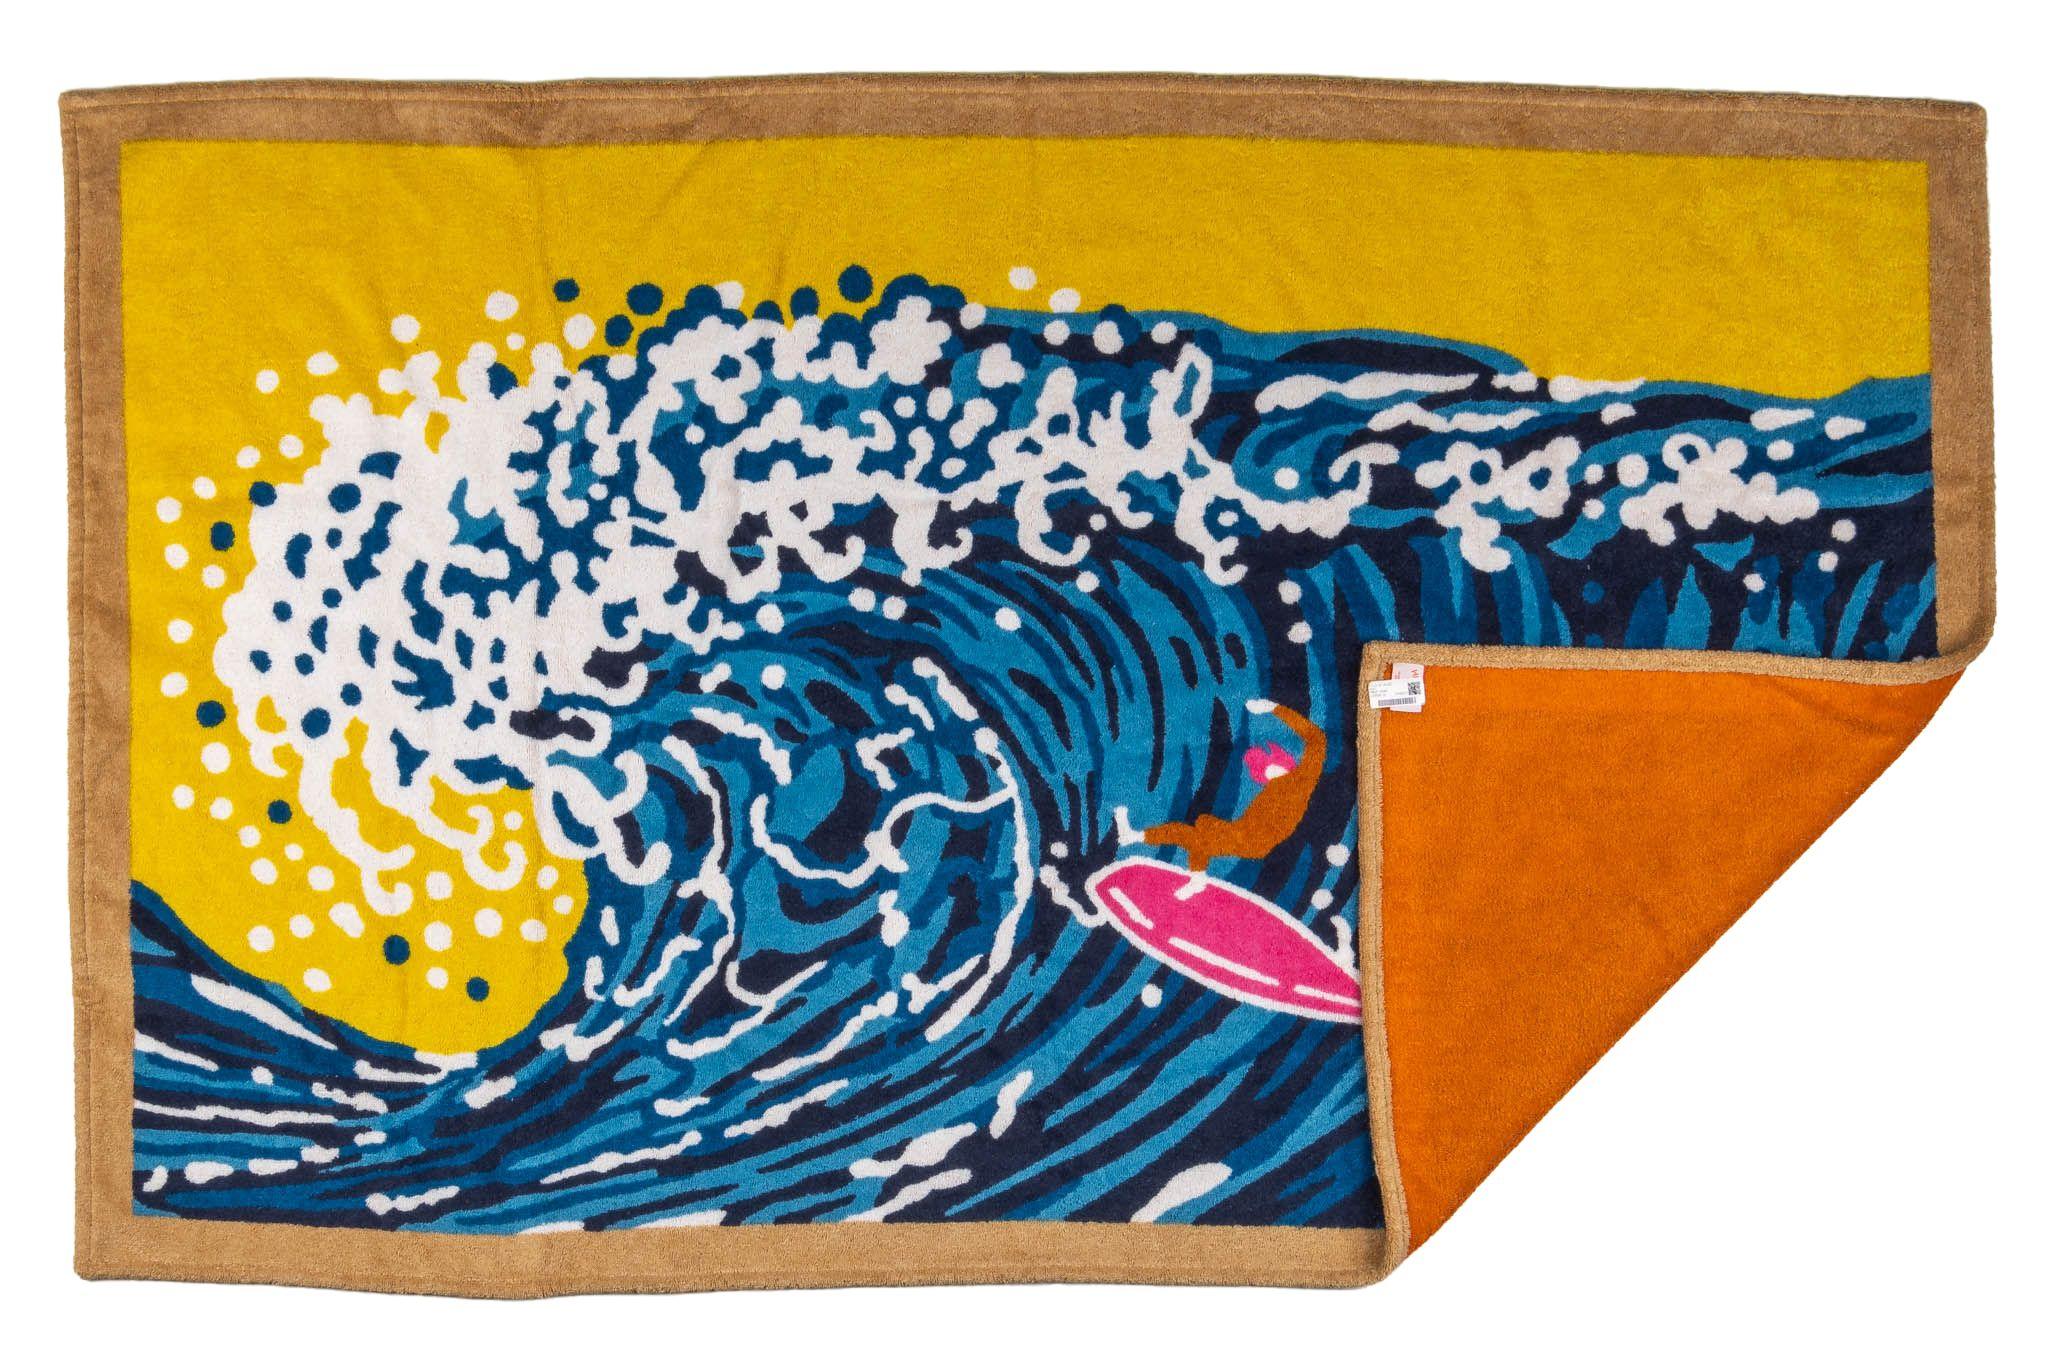 Hermès beach cotton towel with beach wave and surfer design. New with original box.